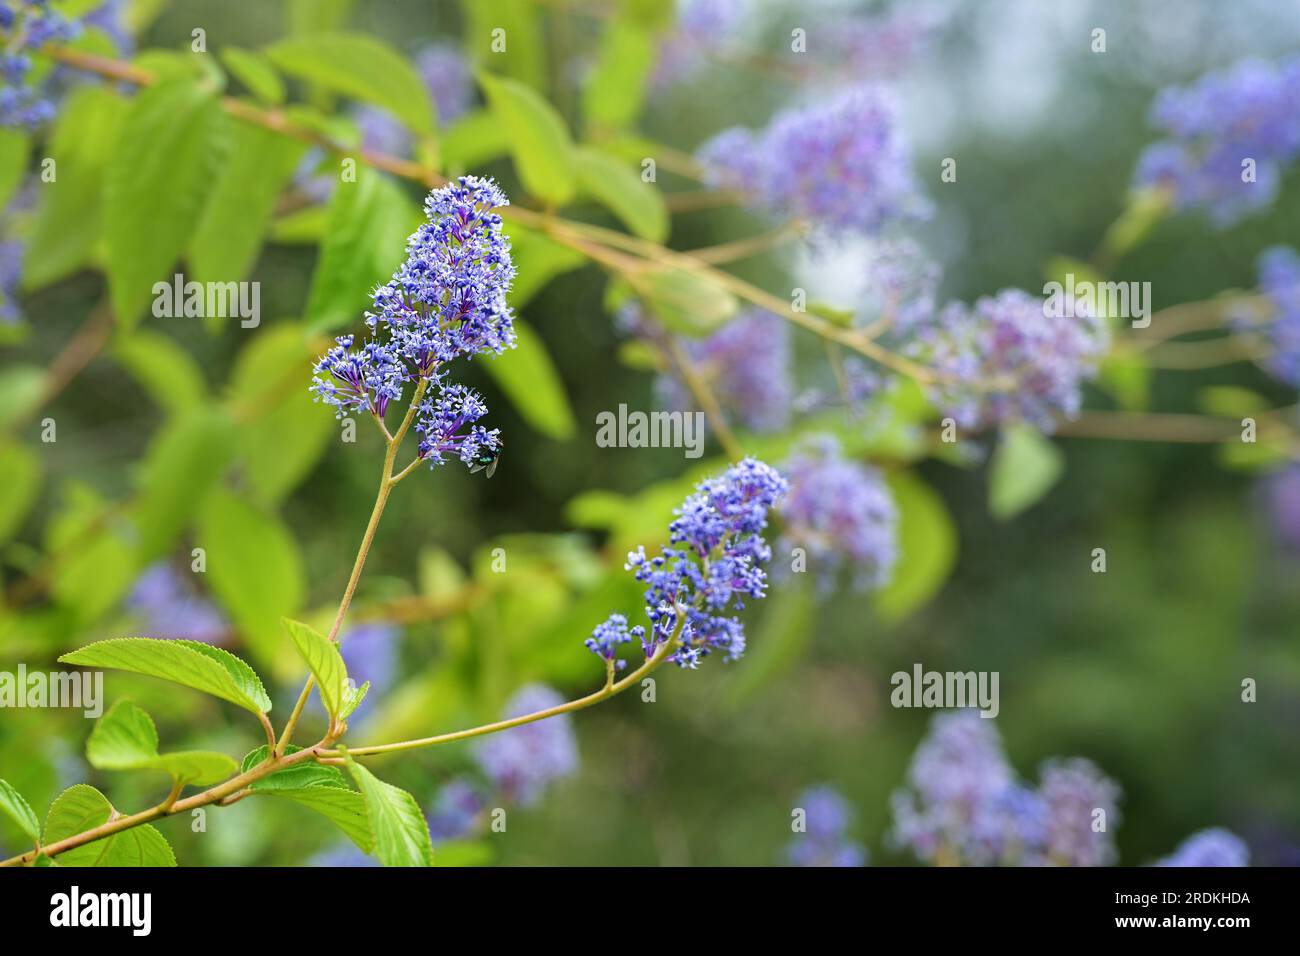 Ceanothus flowers, purple blue flowering shrub for garden and park, also called buckbrush, California lilac or soap bush, copy space, selected focus, Stock Photo